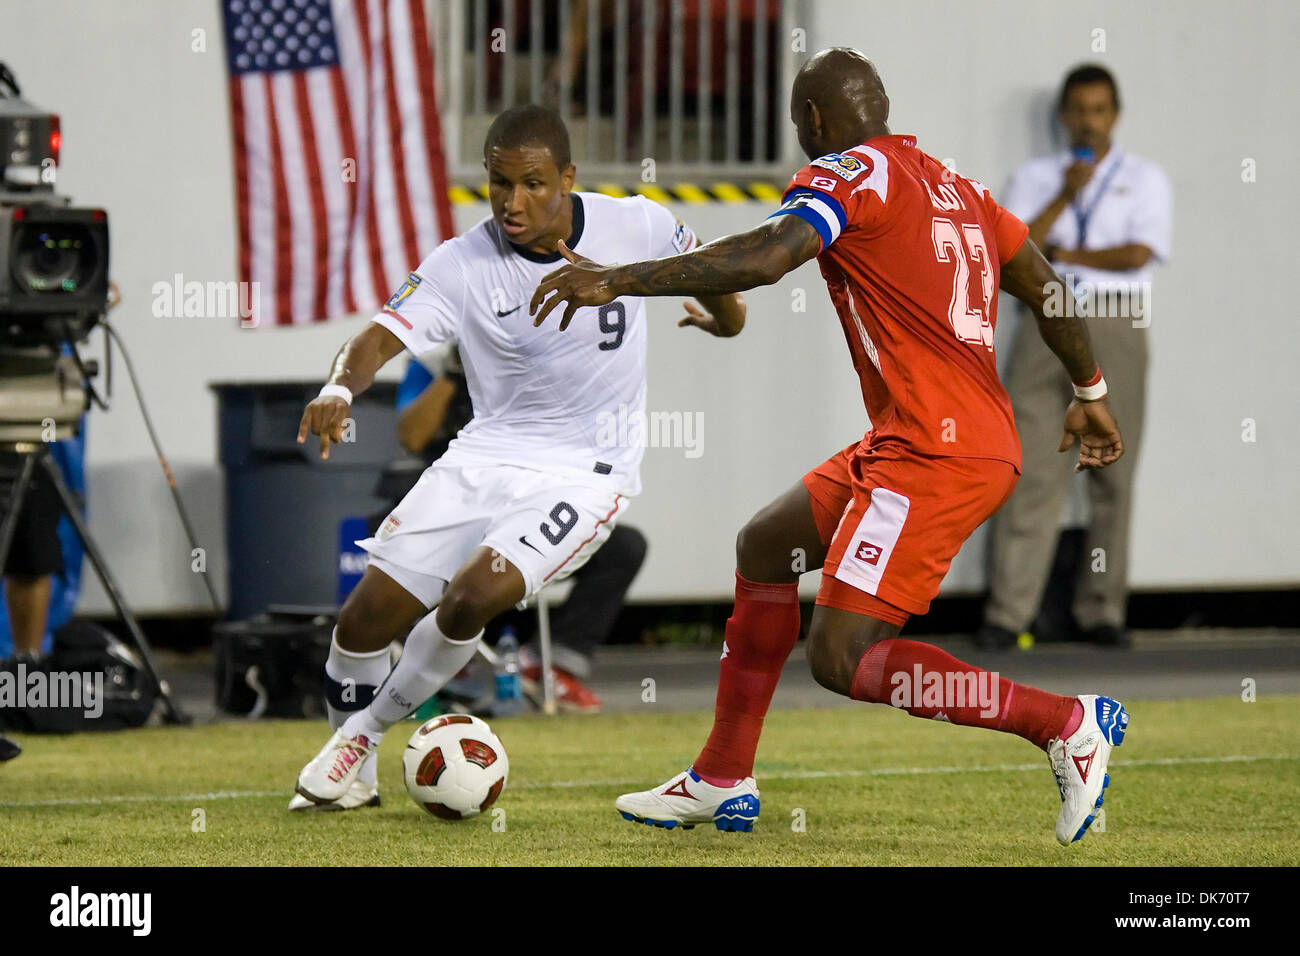 June 11, 2011 - Tampa, Florida, USA - United States attacker Juan Agudelo (9) works his way around Panama defender Felipe Baloy (23)..Panama defeats United States 2-1 in Gold Cup CONCACAF Soccer (Credit Image: © Anthony Smith/Southcreek Global/ZUMAPRESS.com) Stock Photo